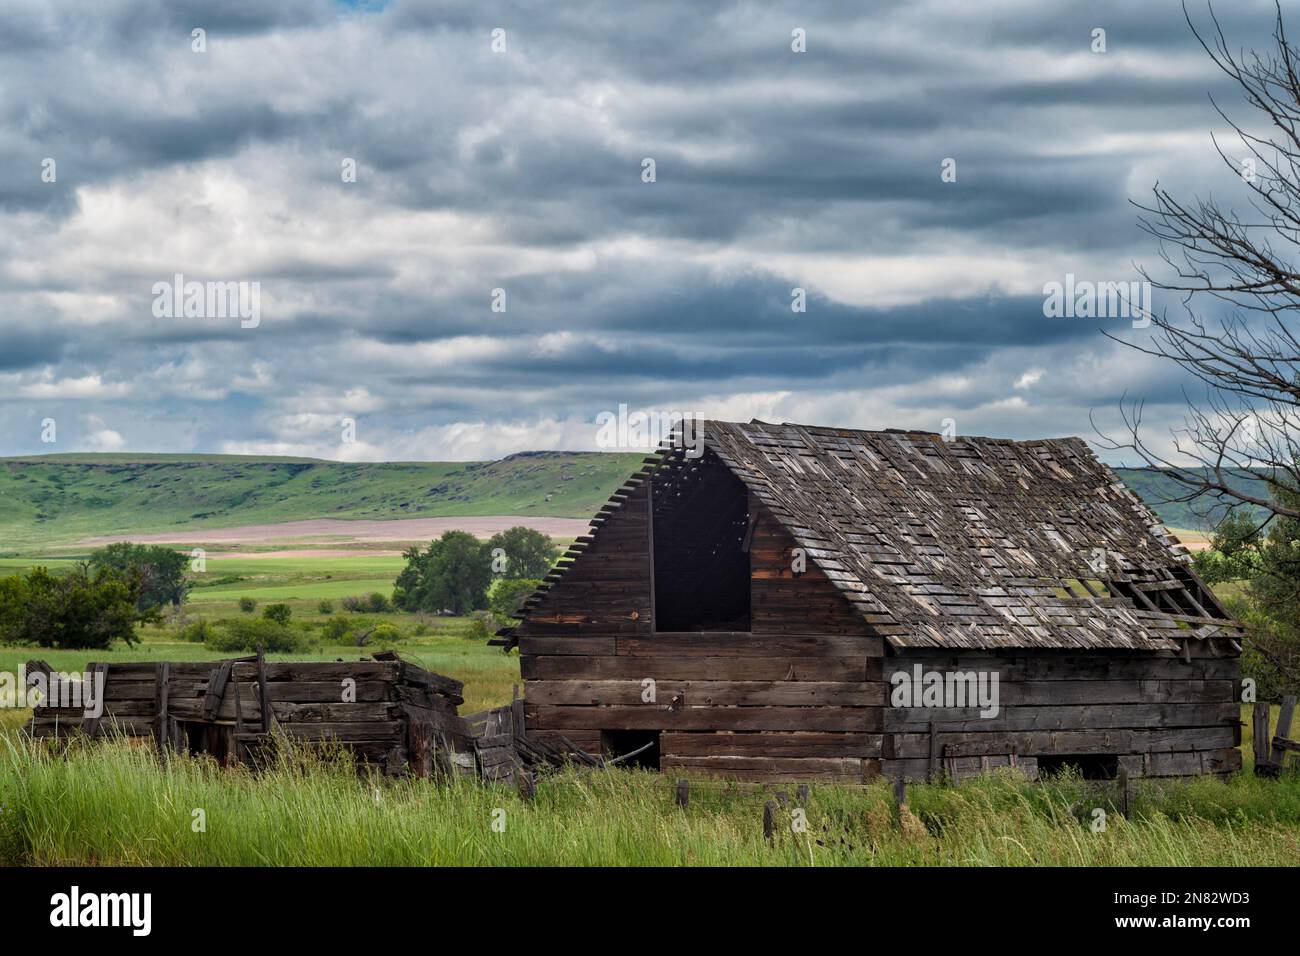 An abandoned wood farm house stands in the grasslands of Pryor, Montana a during stormy afternoon. Stock Photo